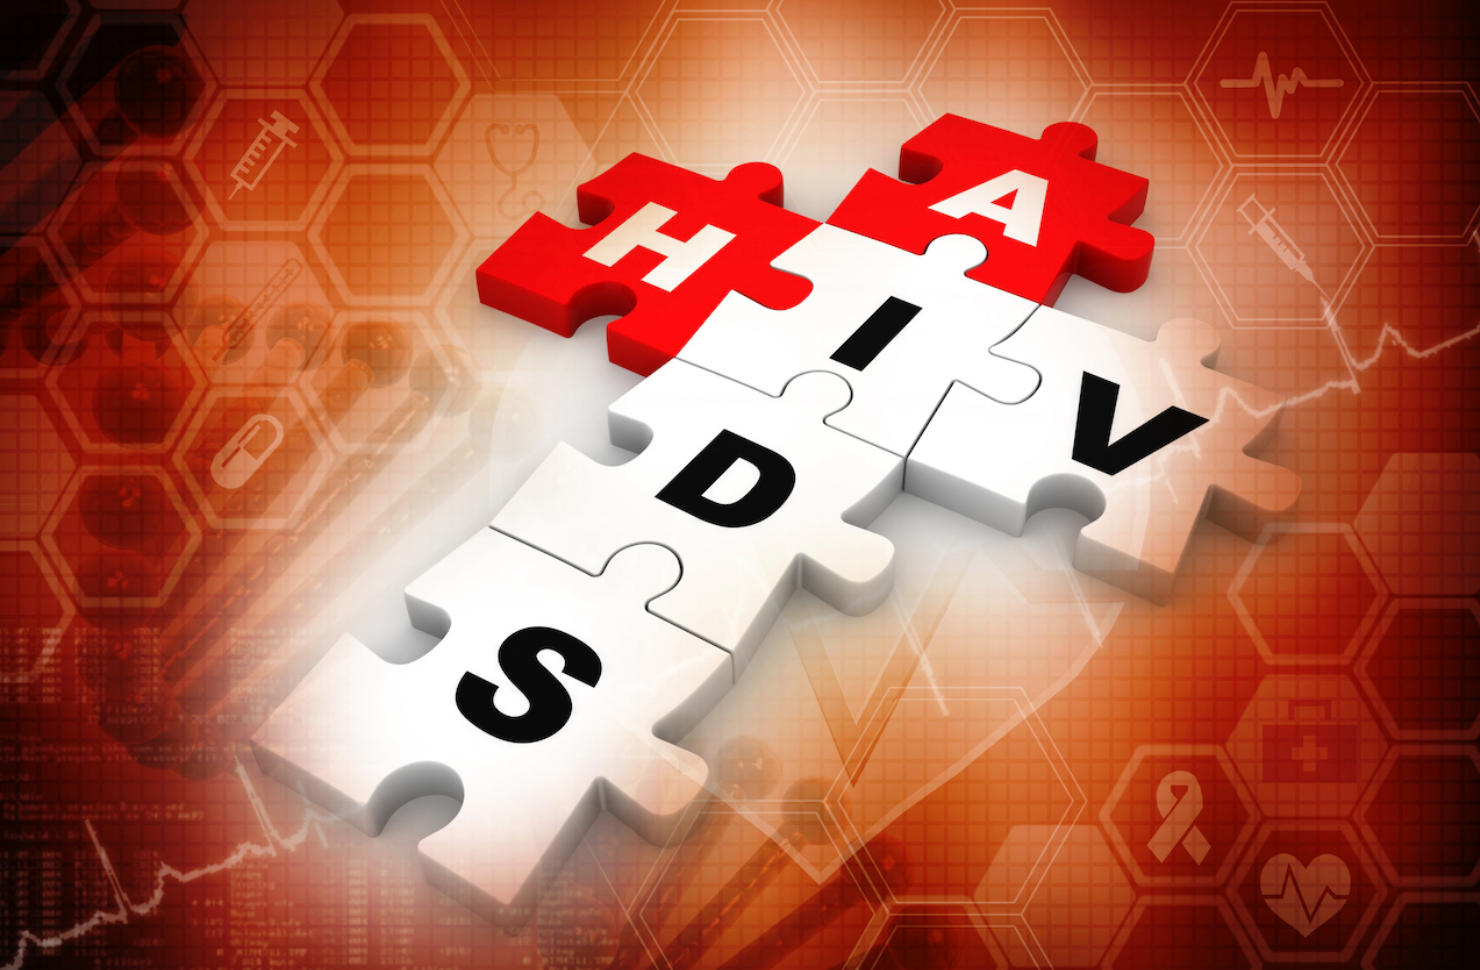 Study: People Living With HIV Need Custom COVID-19 Vaccination Information